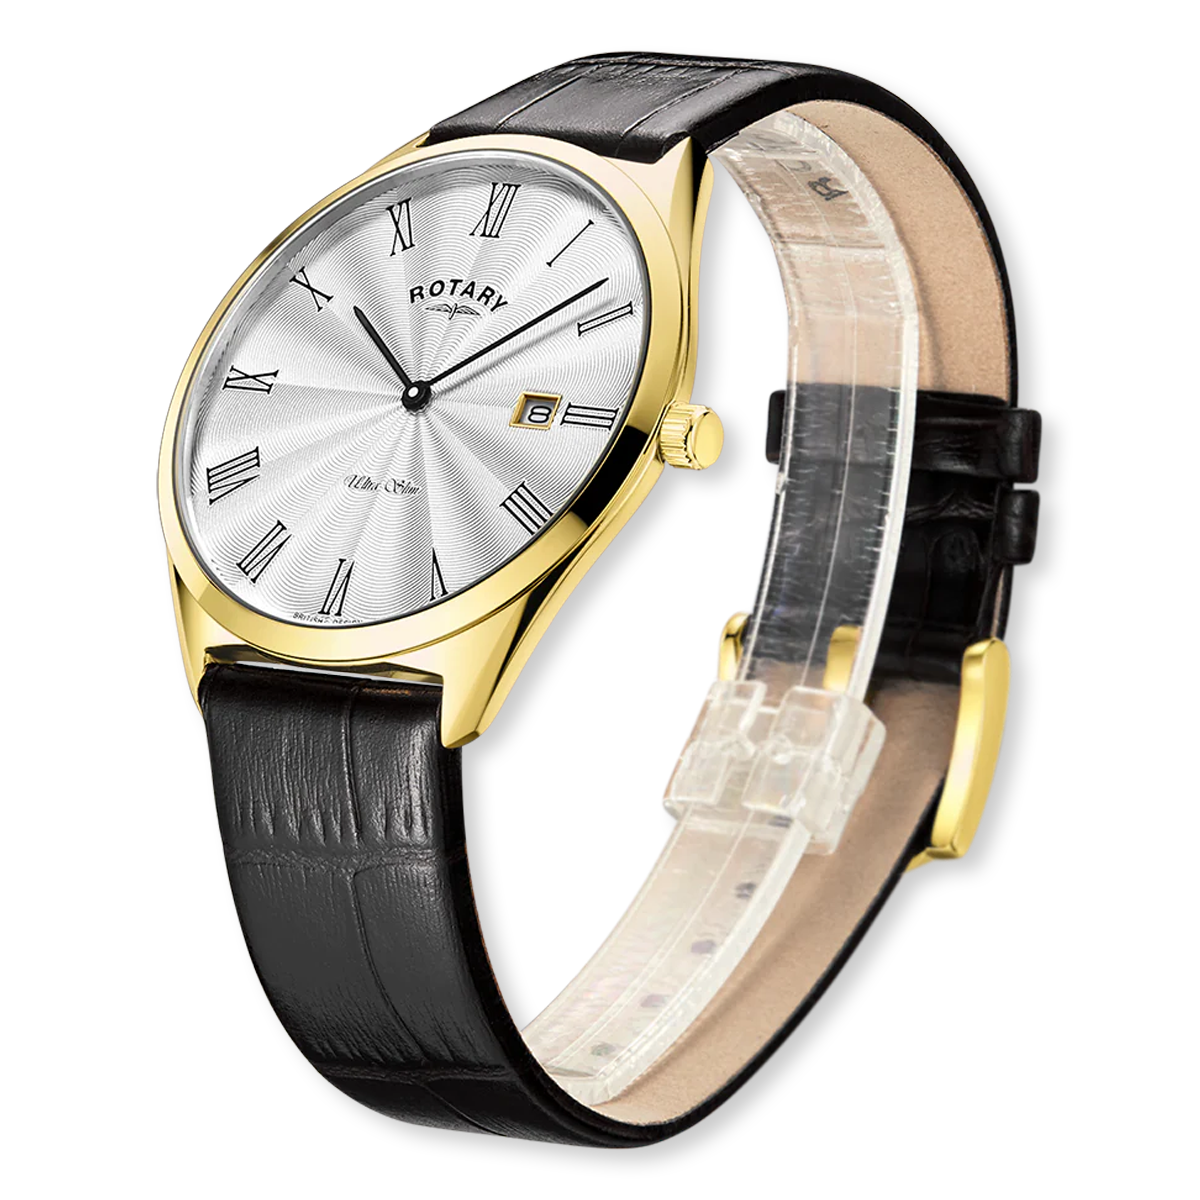 Rotary Ultra Slim Watch, White Dial with Black Leather Strap & Gold Plated Case - GS08013/01